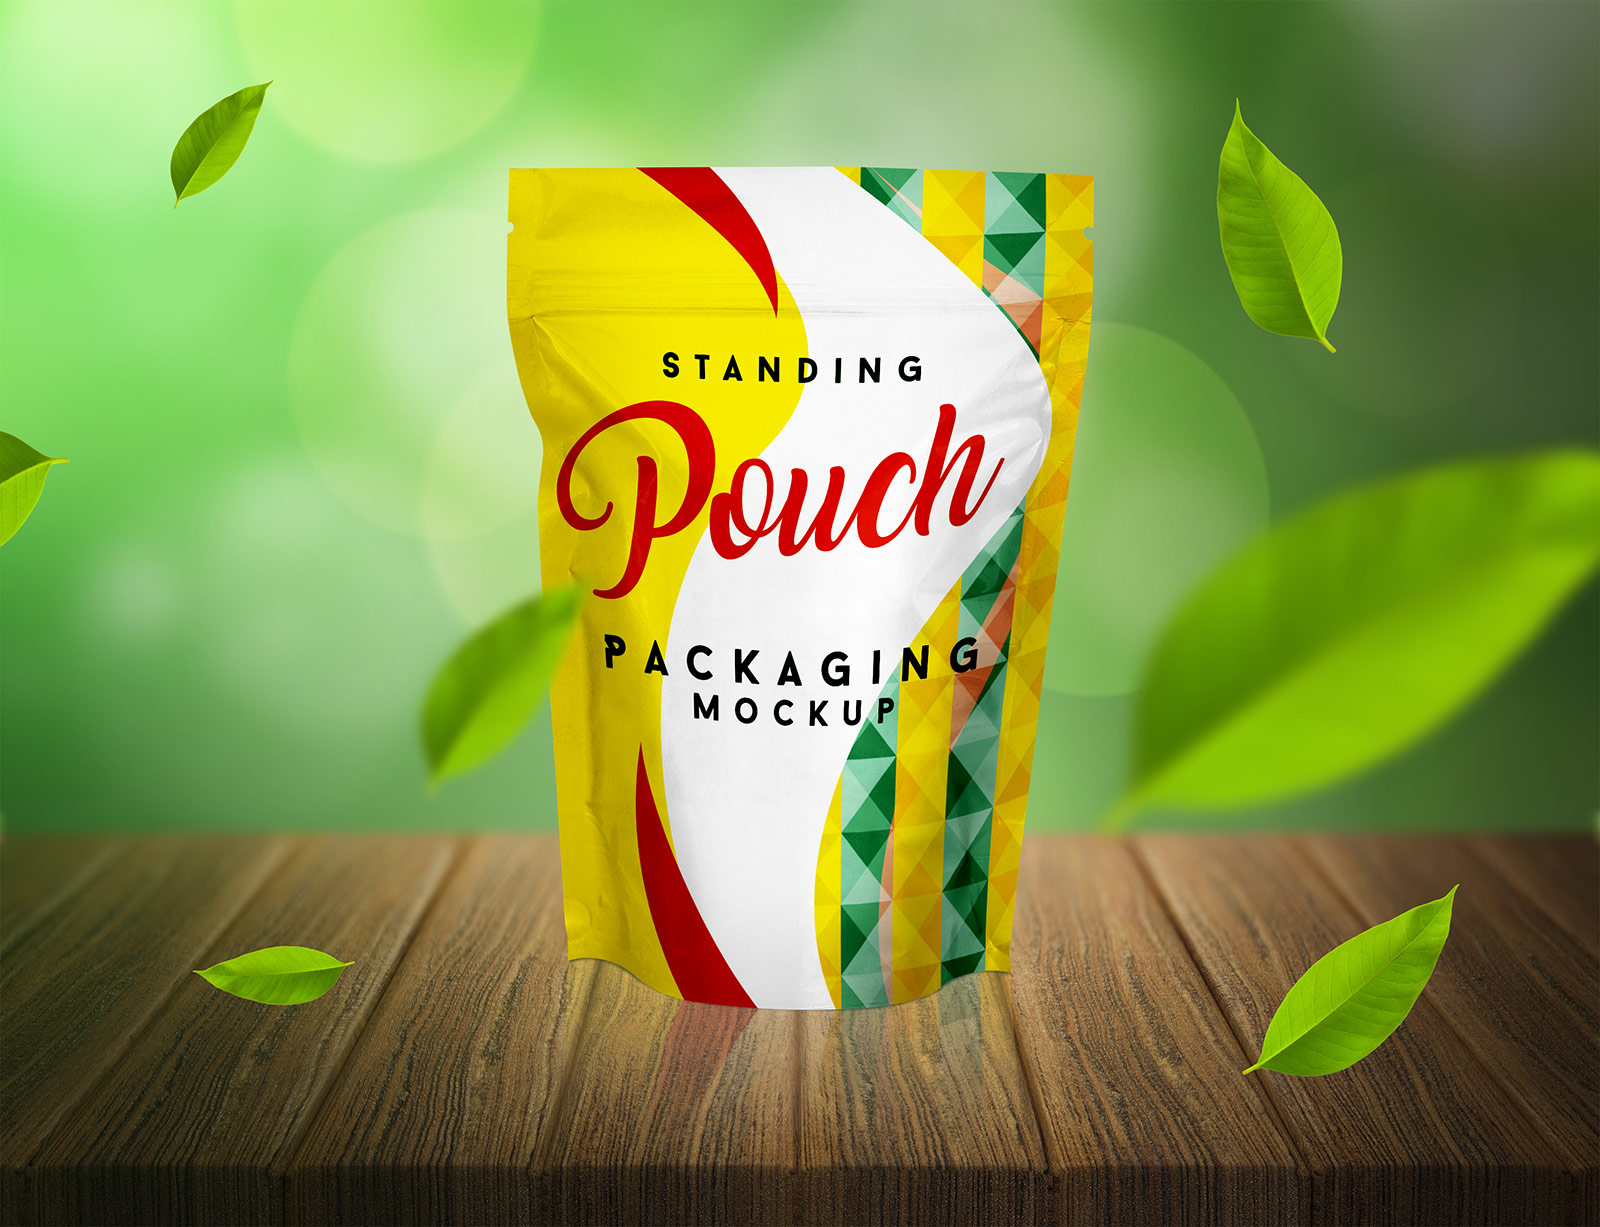 Free-Standup-Pouch-Packaging-Mockup-PSD-2